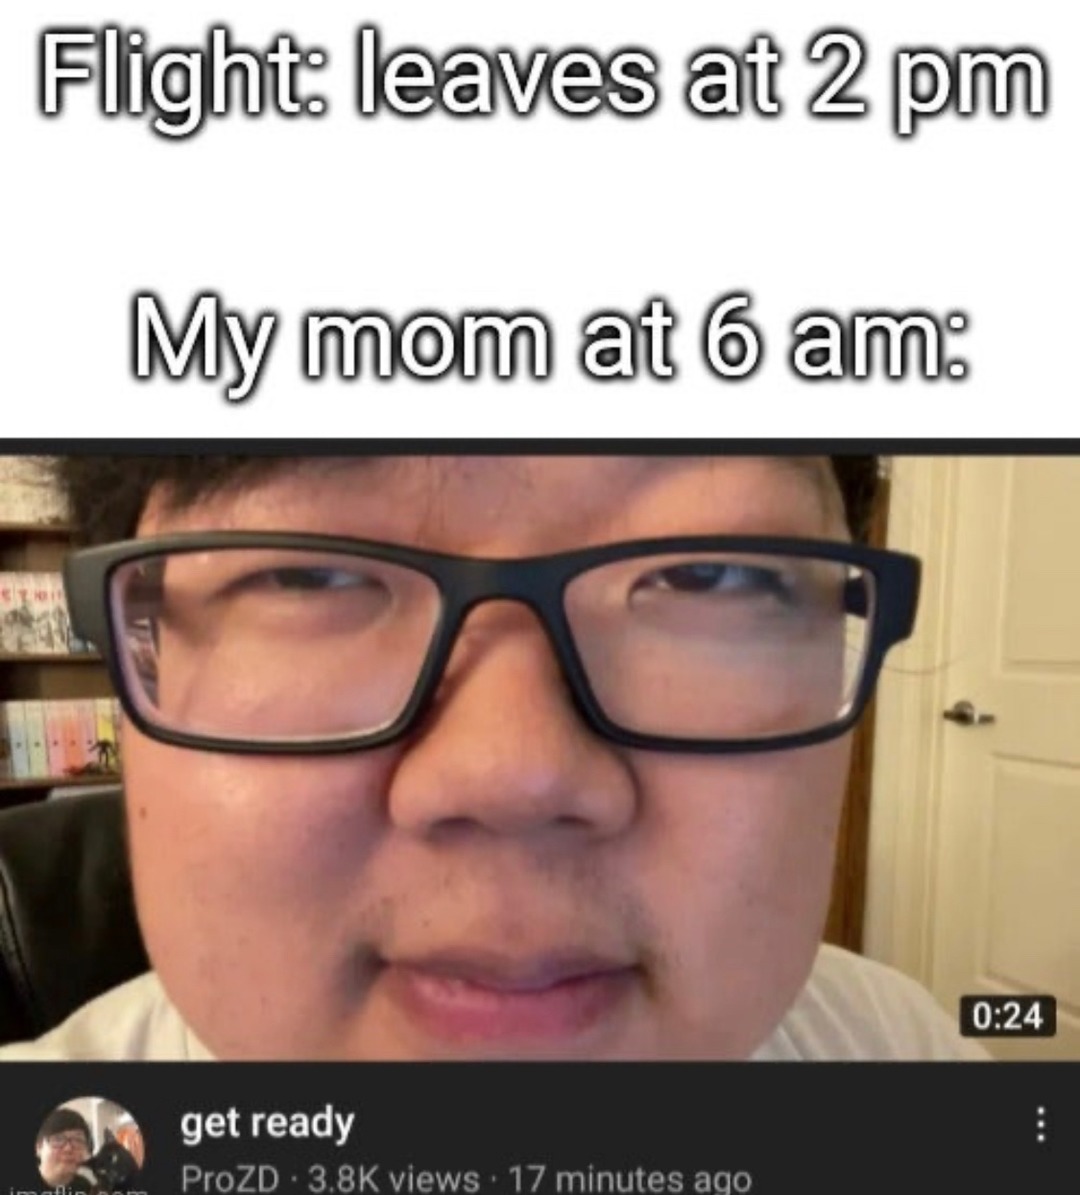 We can’t miss this flight - meme